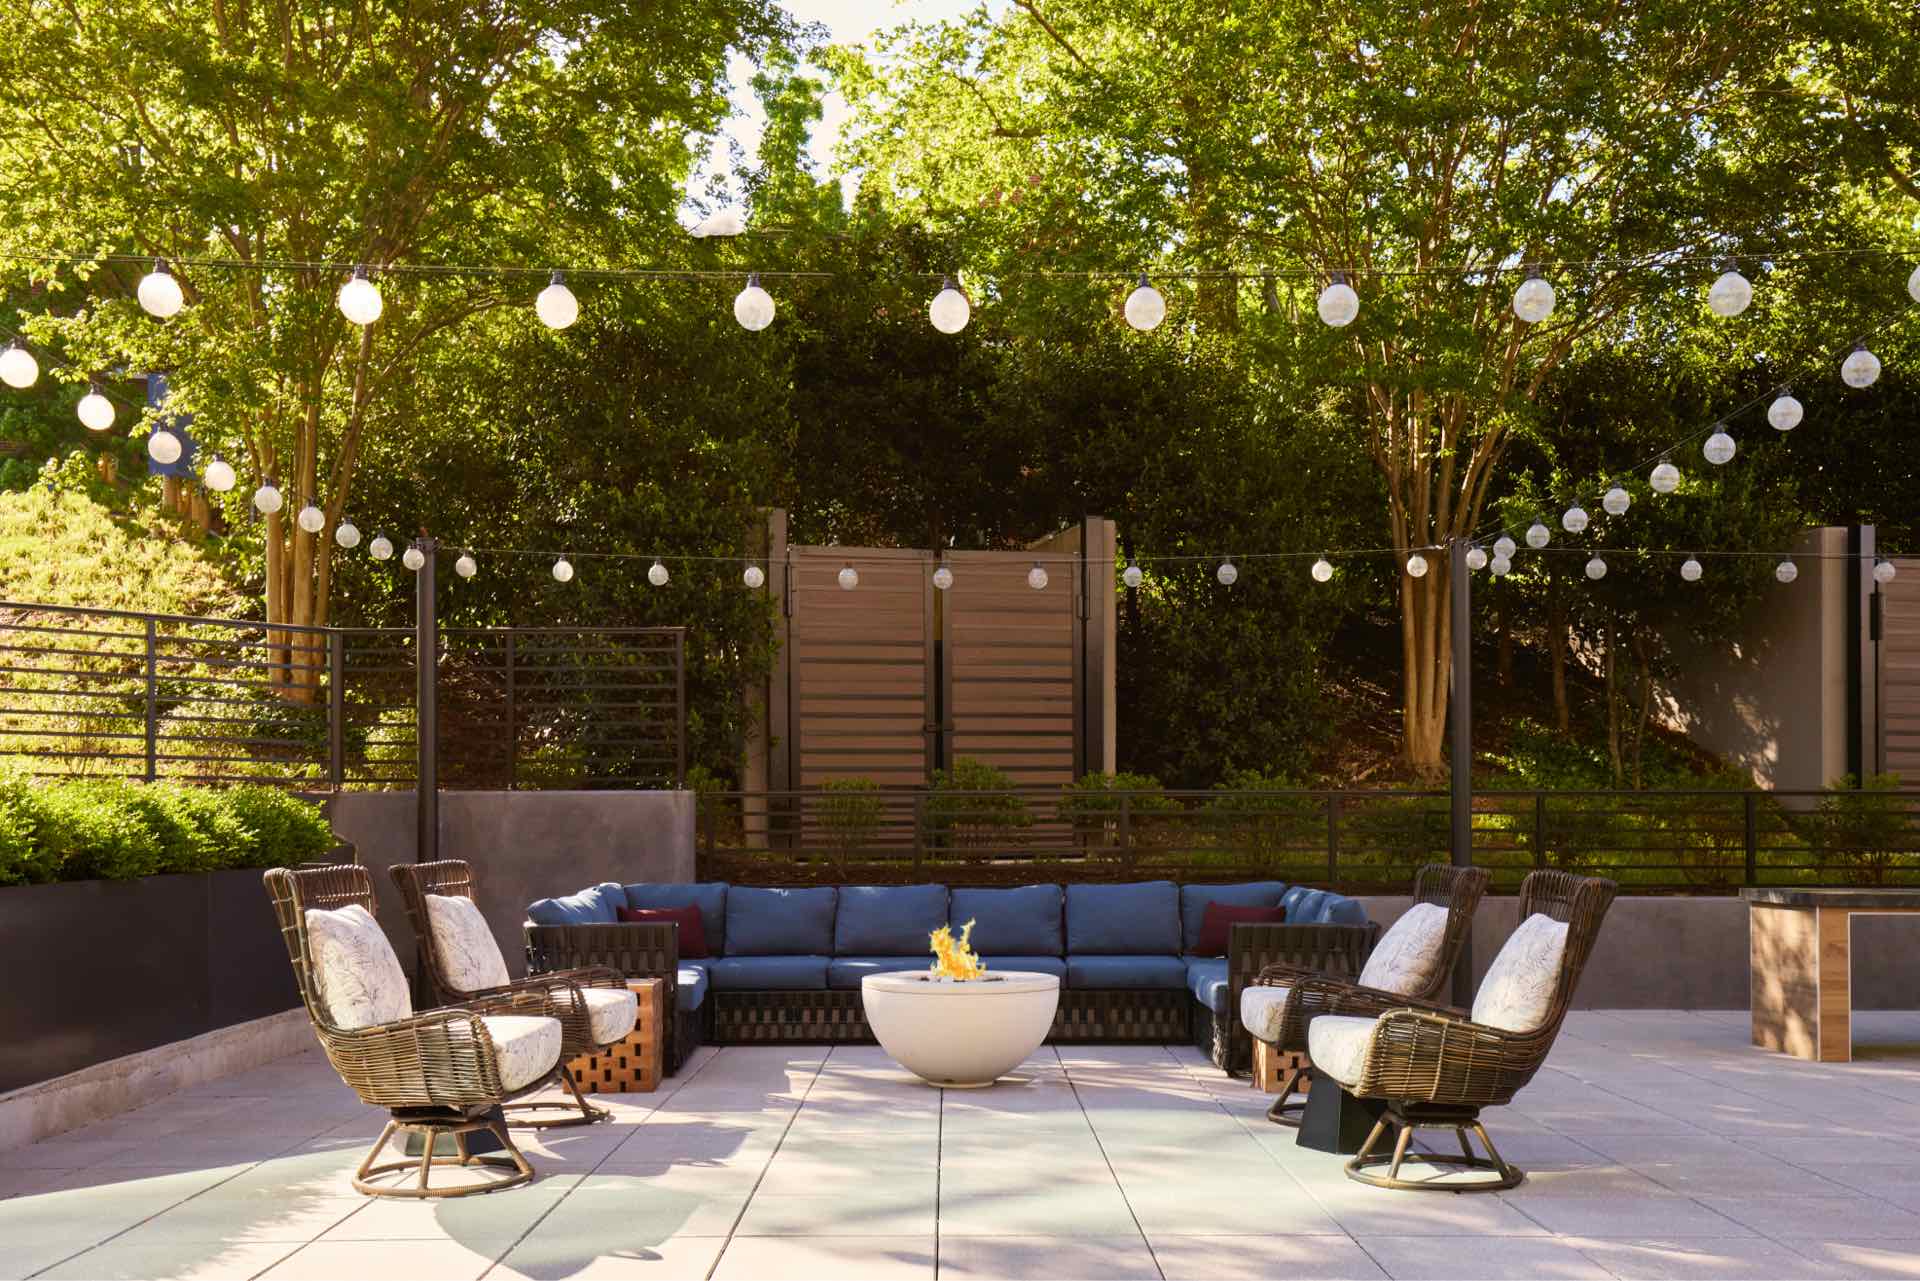 Outdoor spaces with a welcoming ambiance